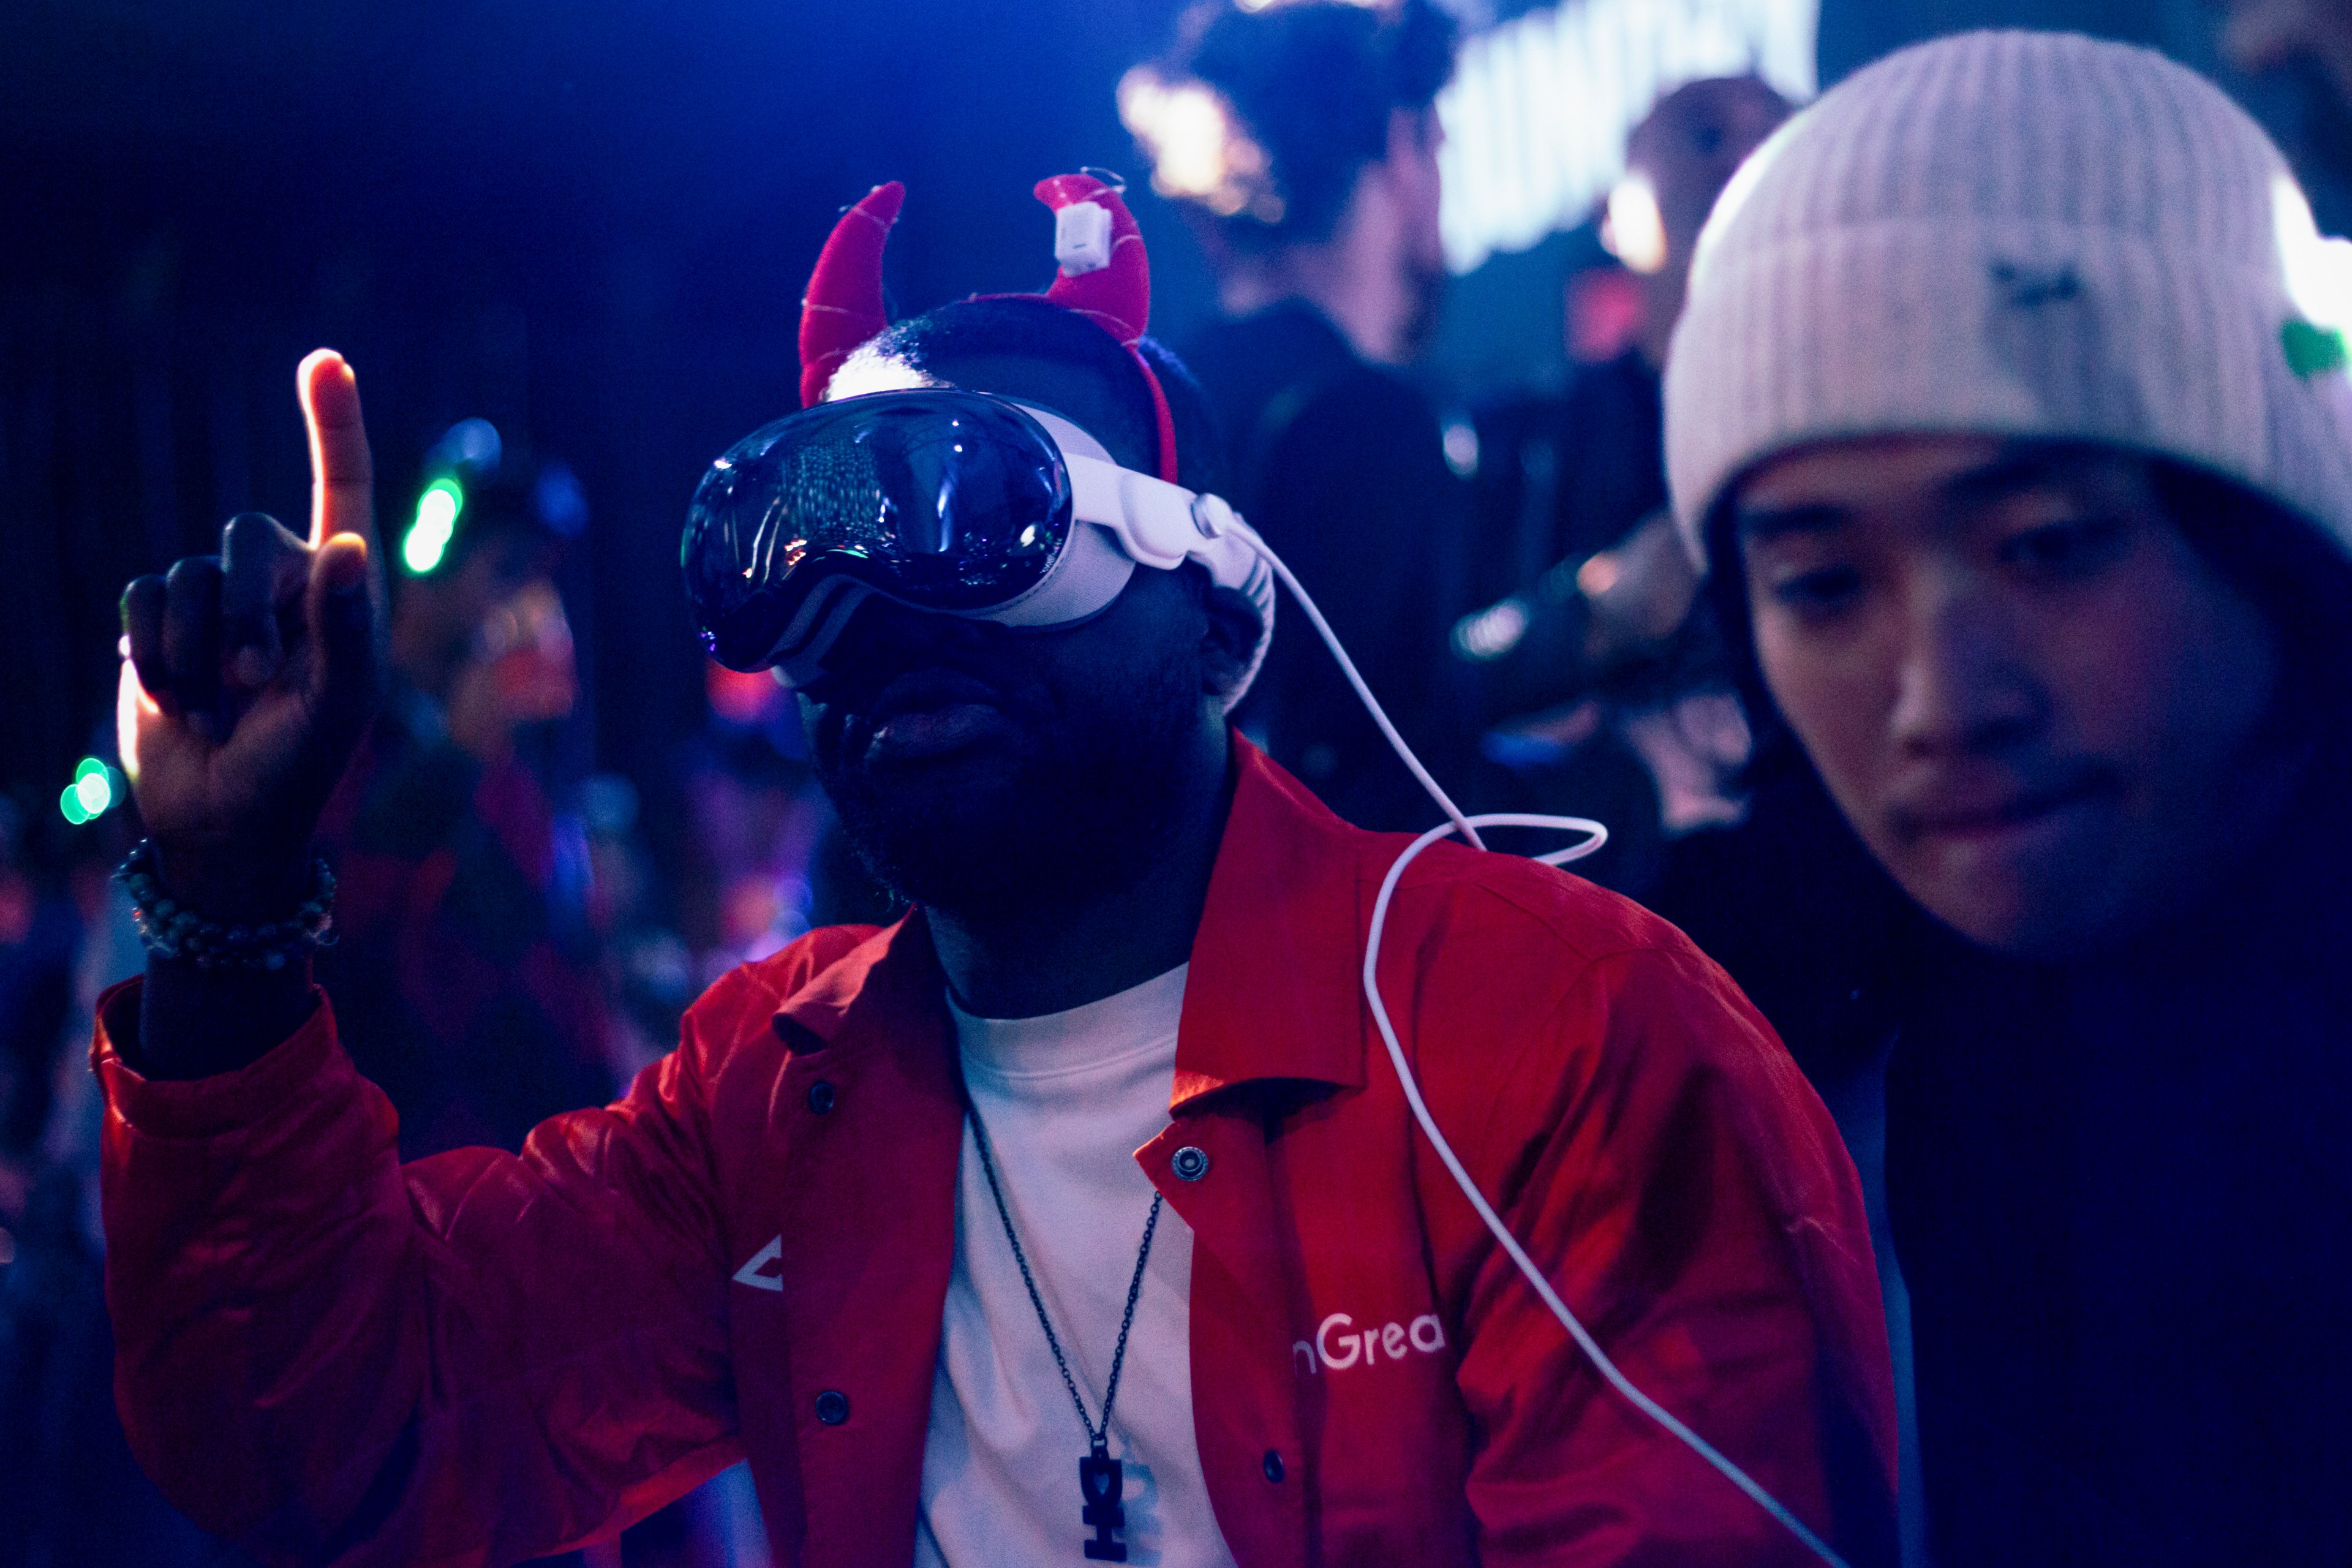 A person in a red jacket and Apple Vision Pro headset wears red cat ears and gestures with his finger up in the air next to another person.